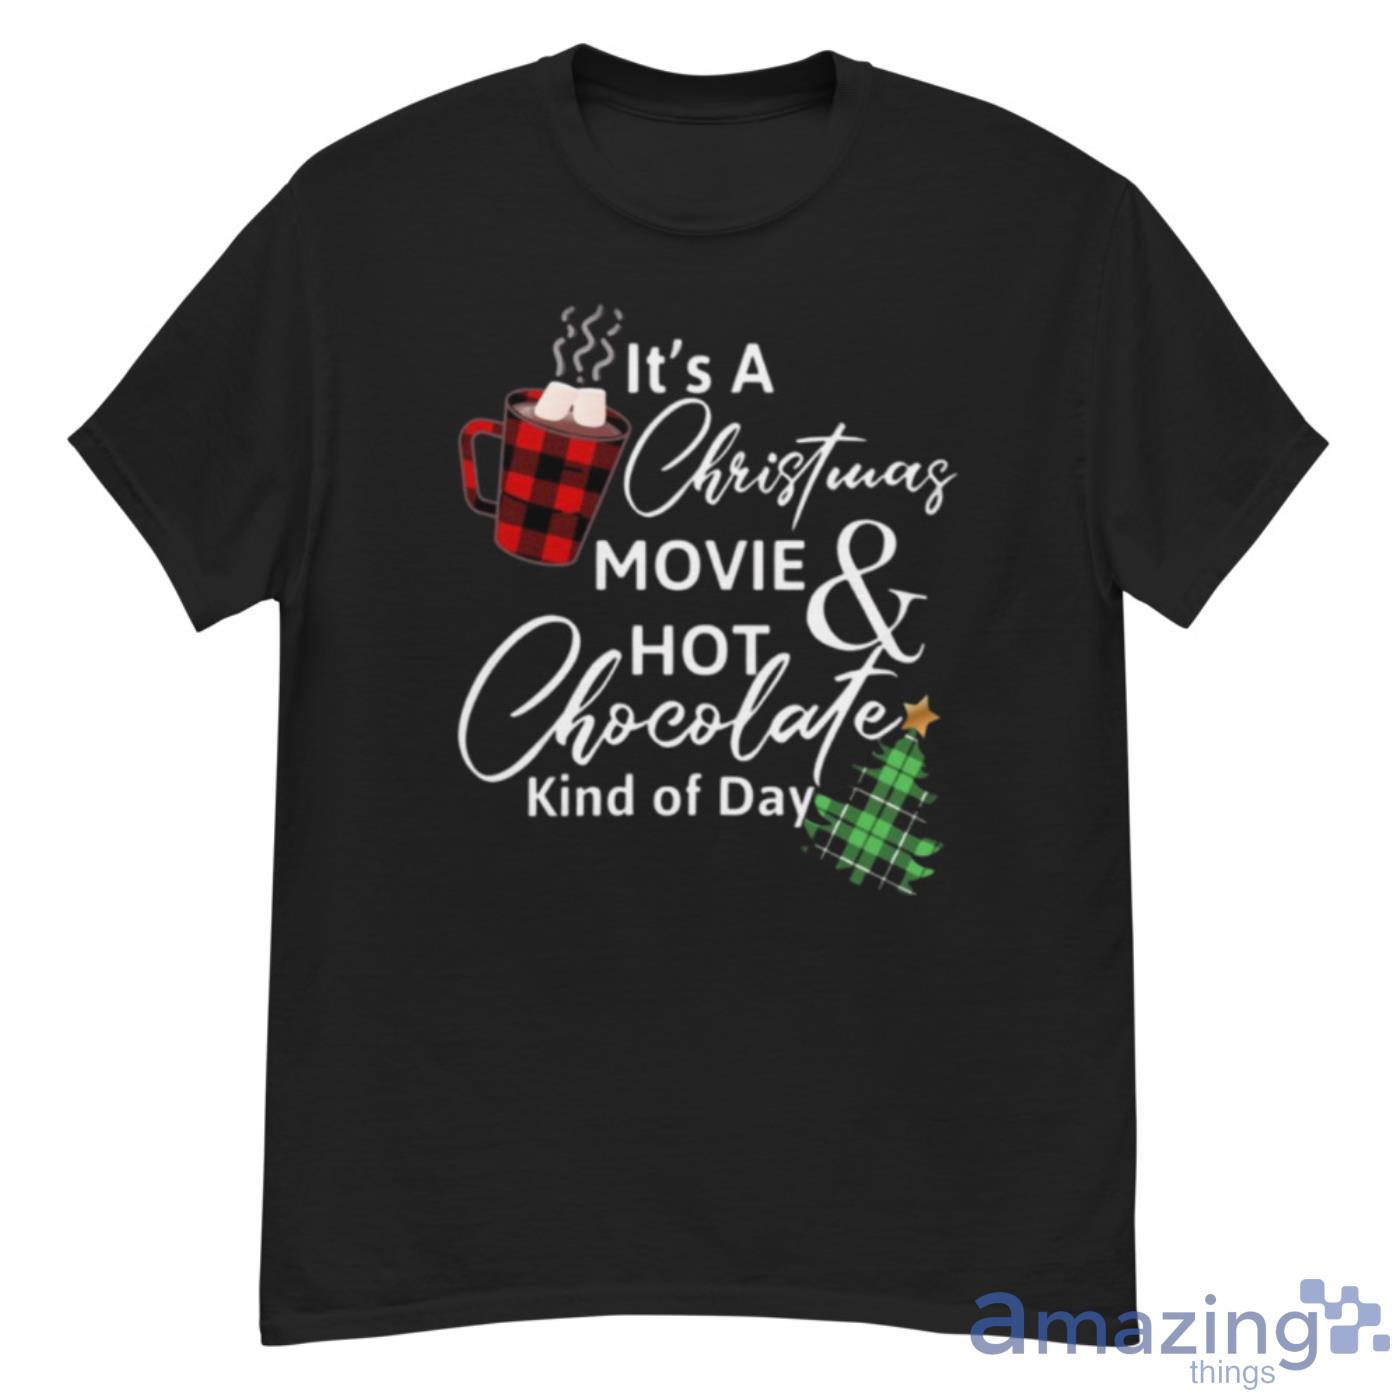 It’s A Christmas Movie And Hot Chocolate Kind Of Day Christmas Shirt - G500 Men’s Classic T-Shirt